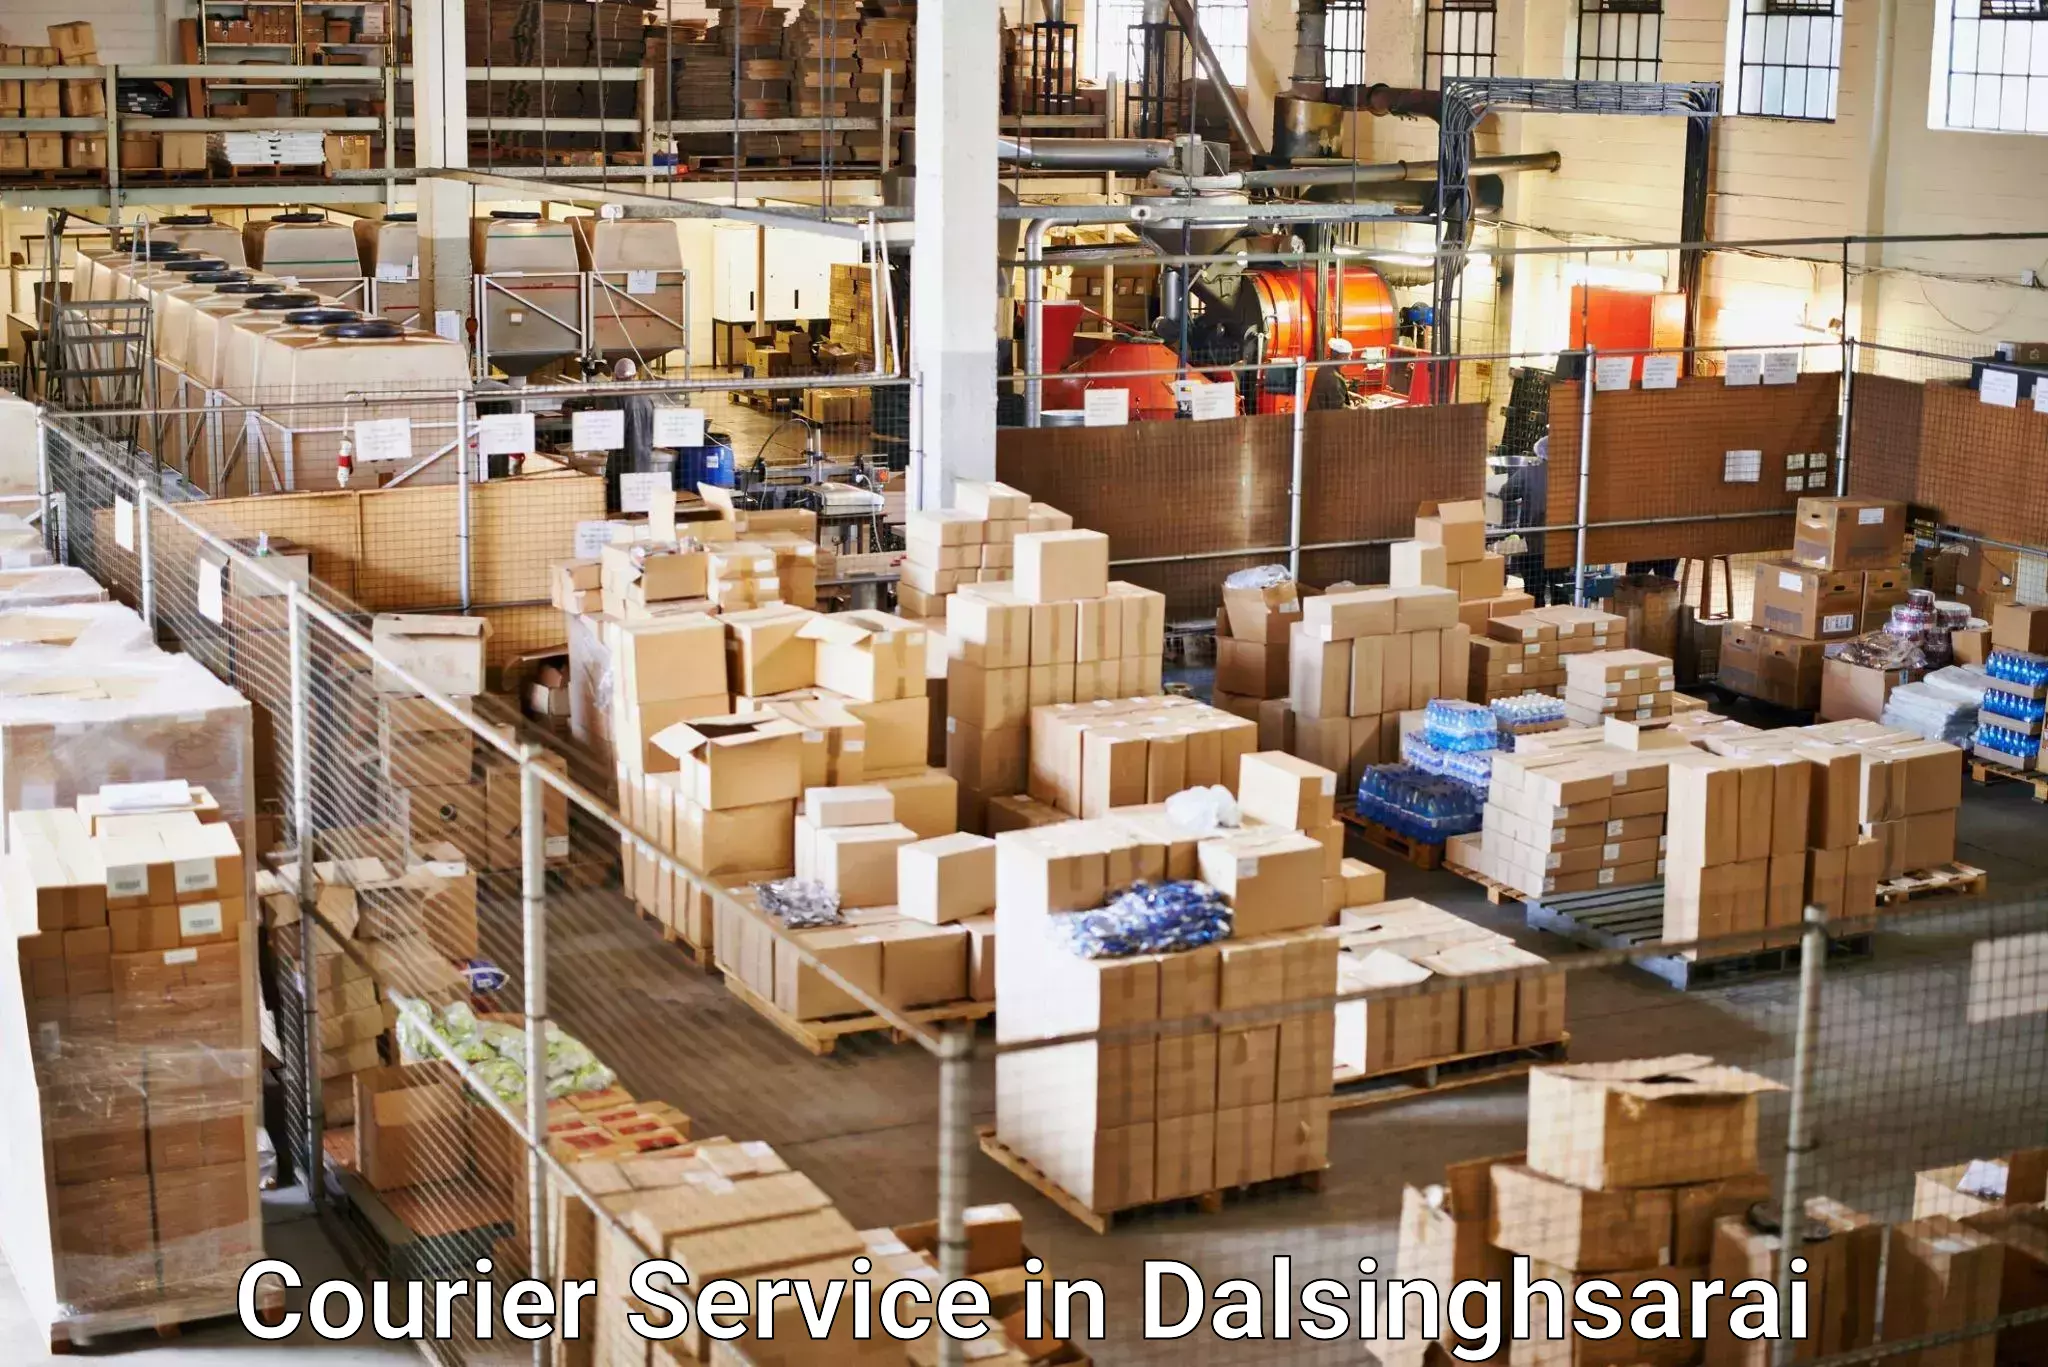 Affordable parcel service in Dalsinghsarai